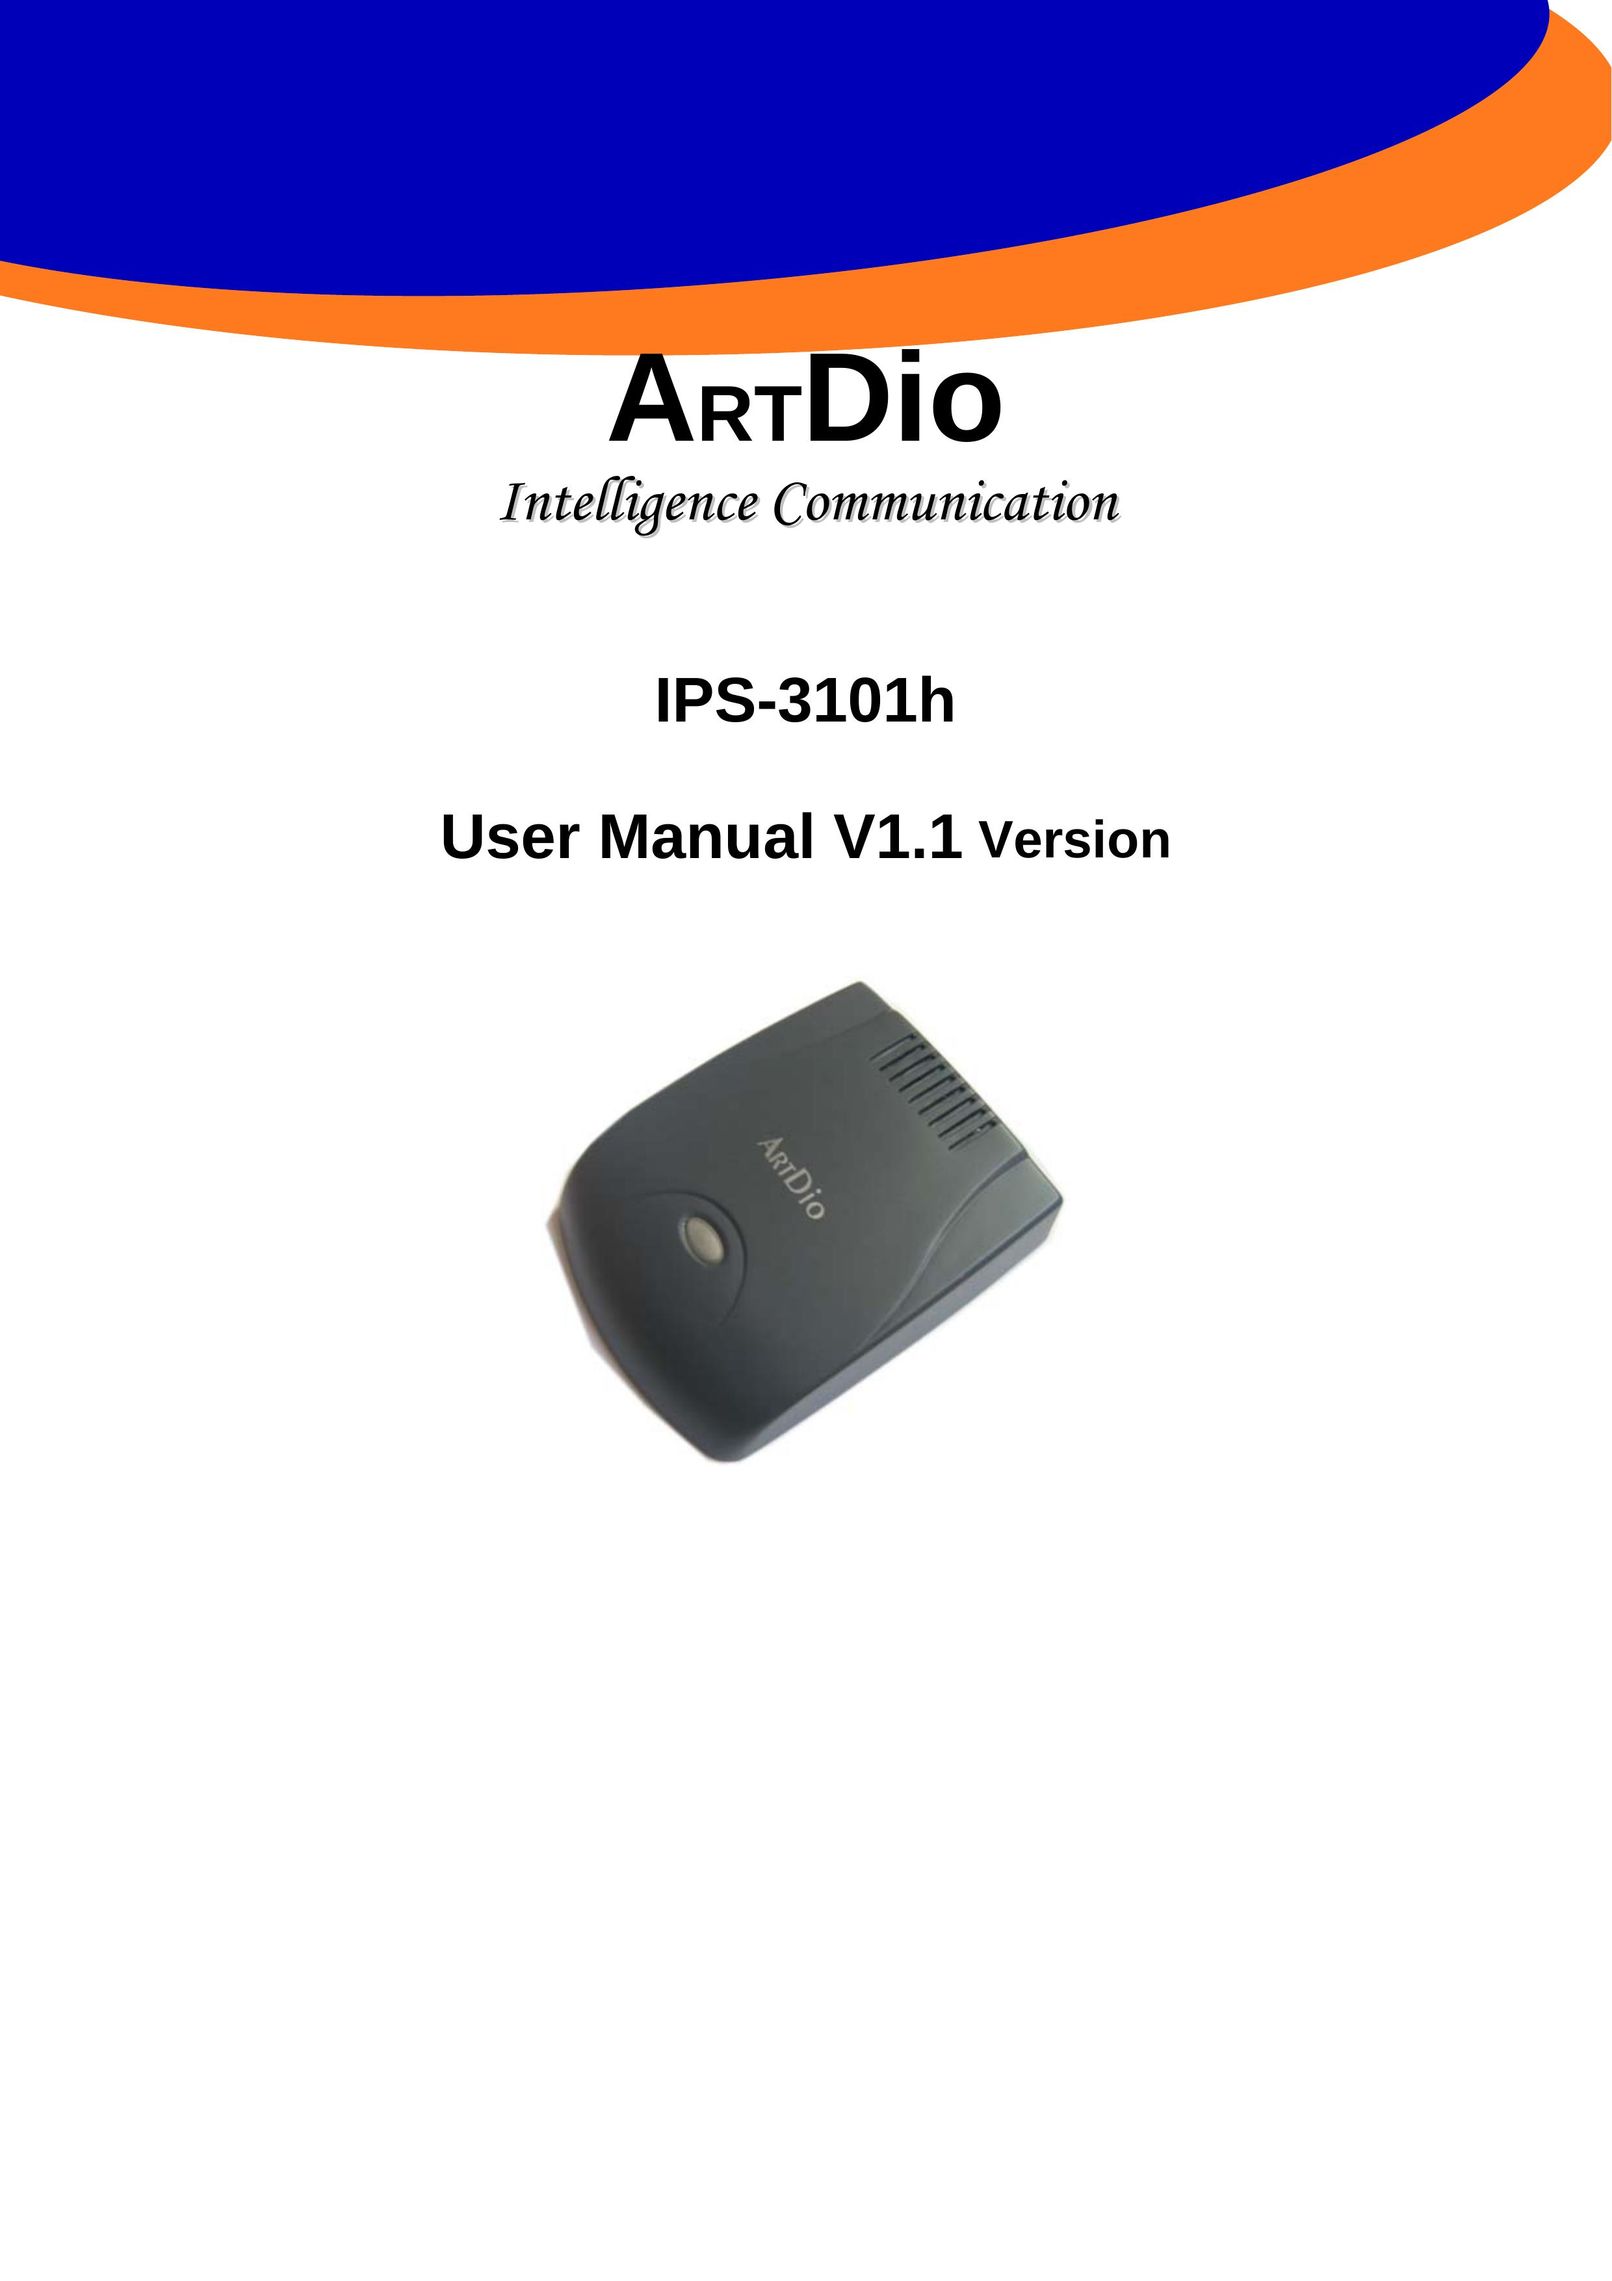 ArtDio IPS-3101h Network Router User Manual